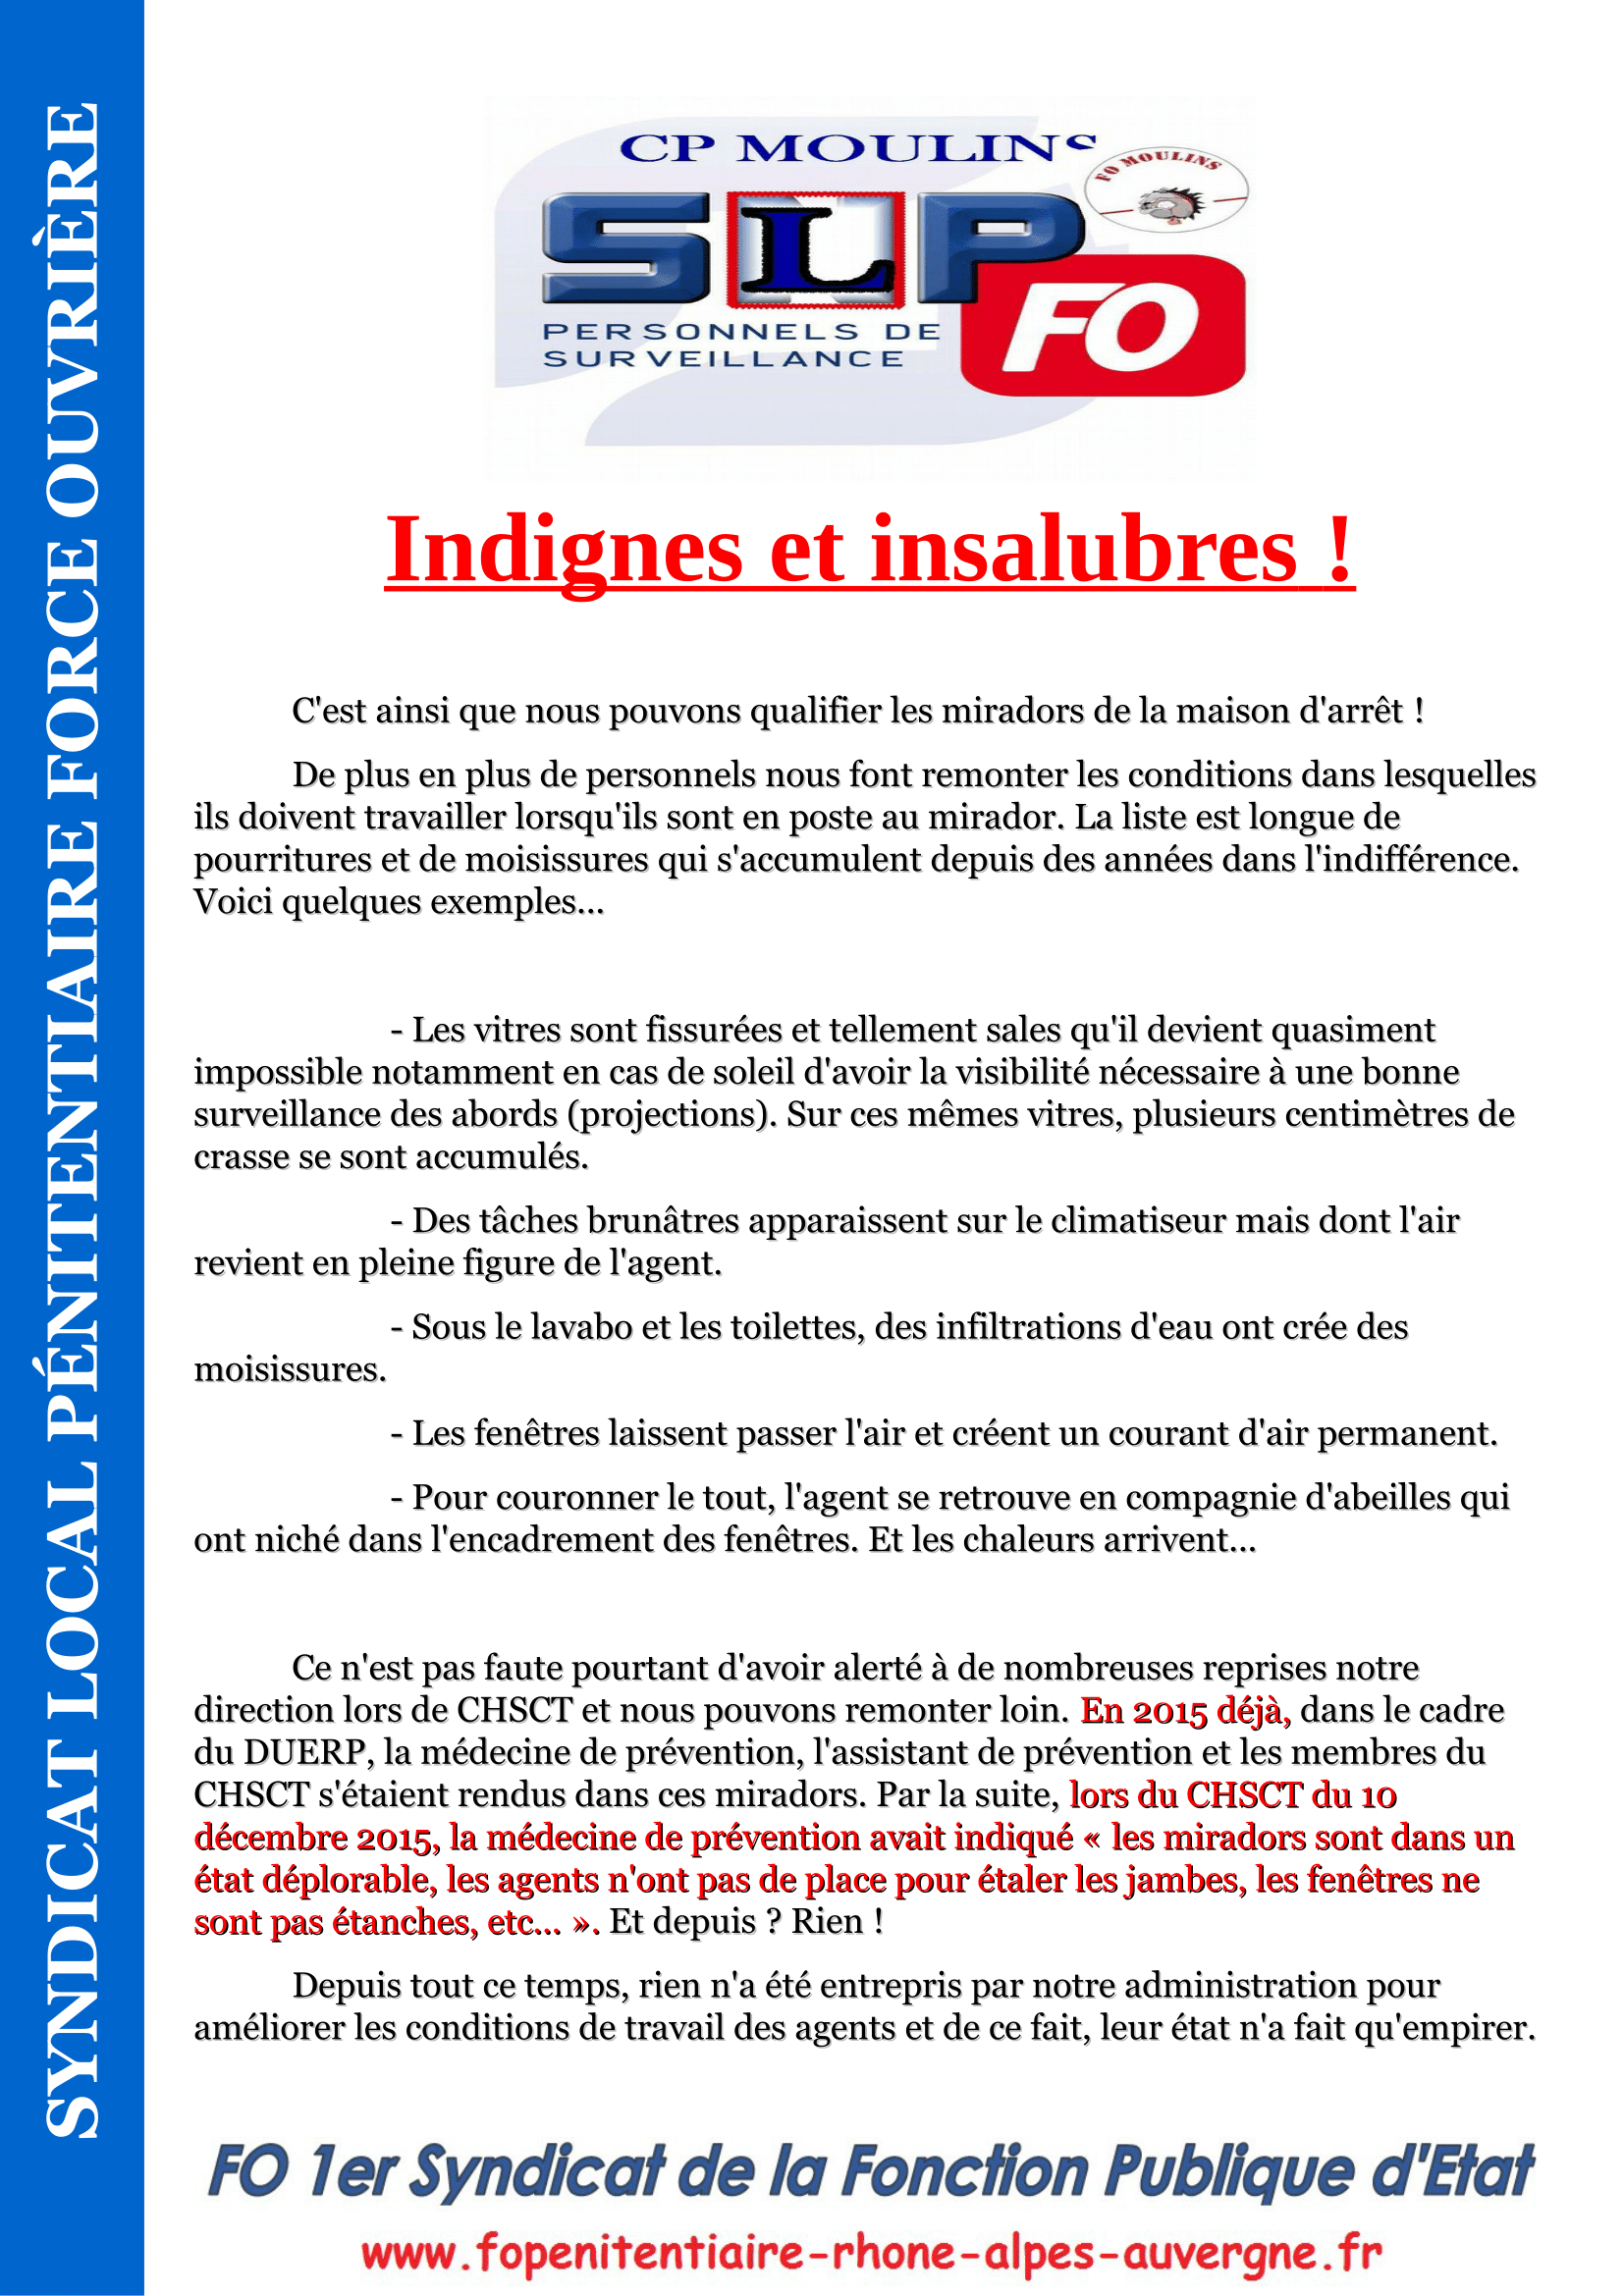 Tract CP Moulins - Miradors-1